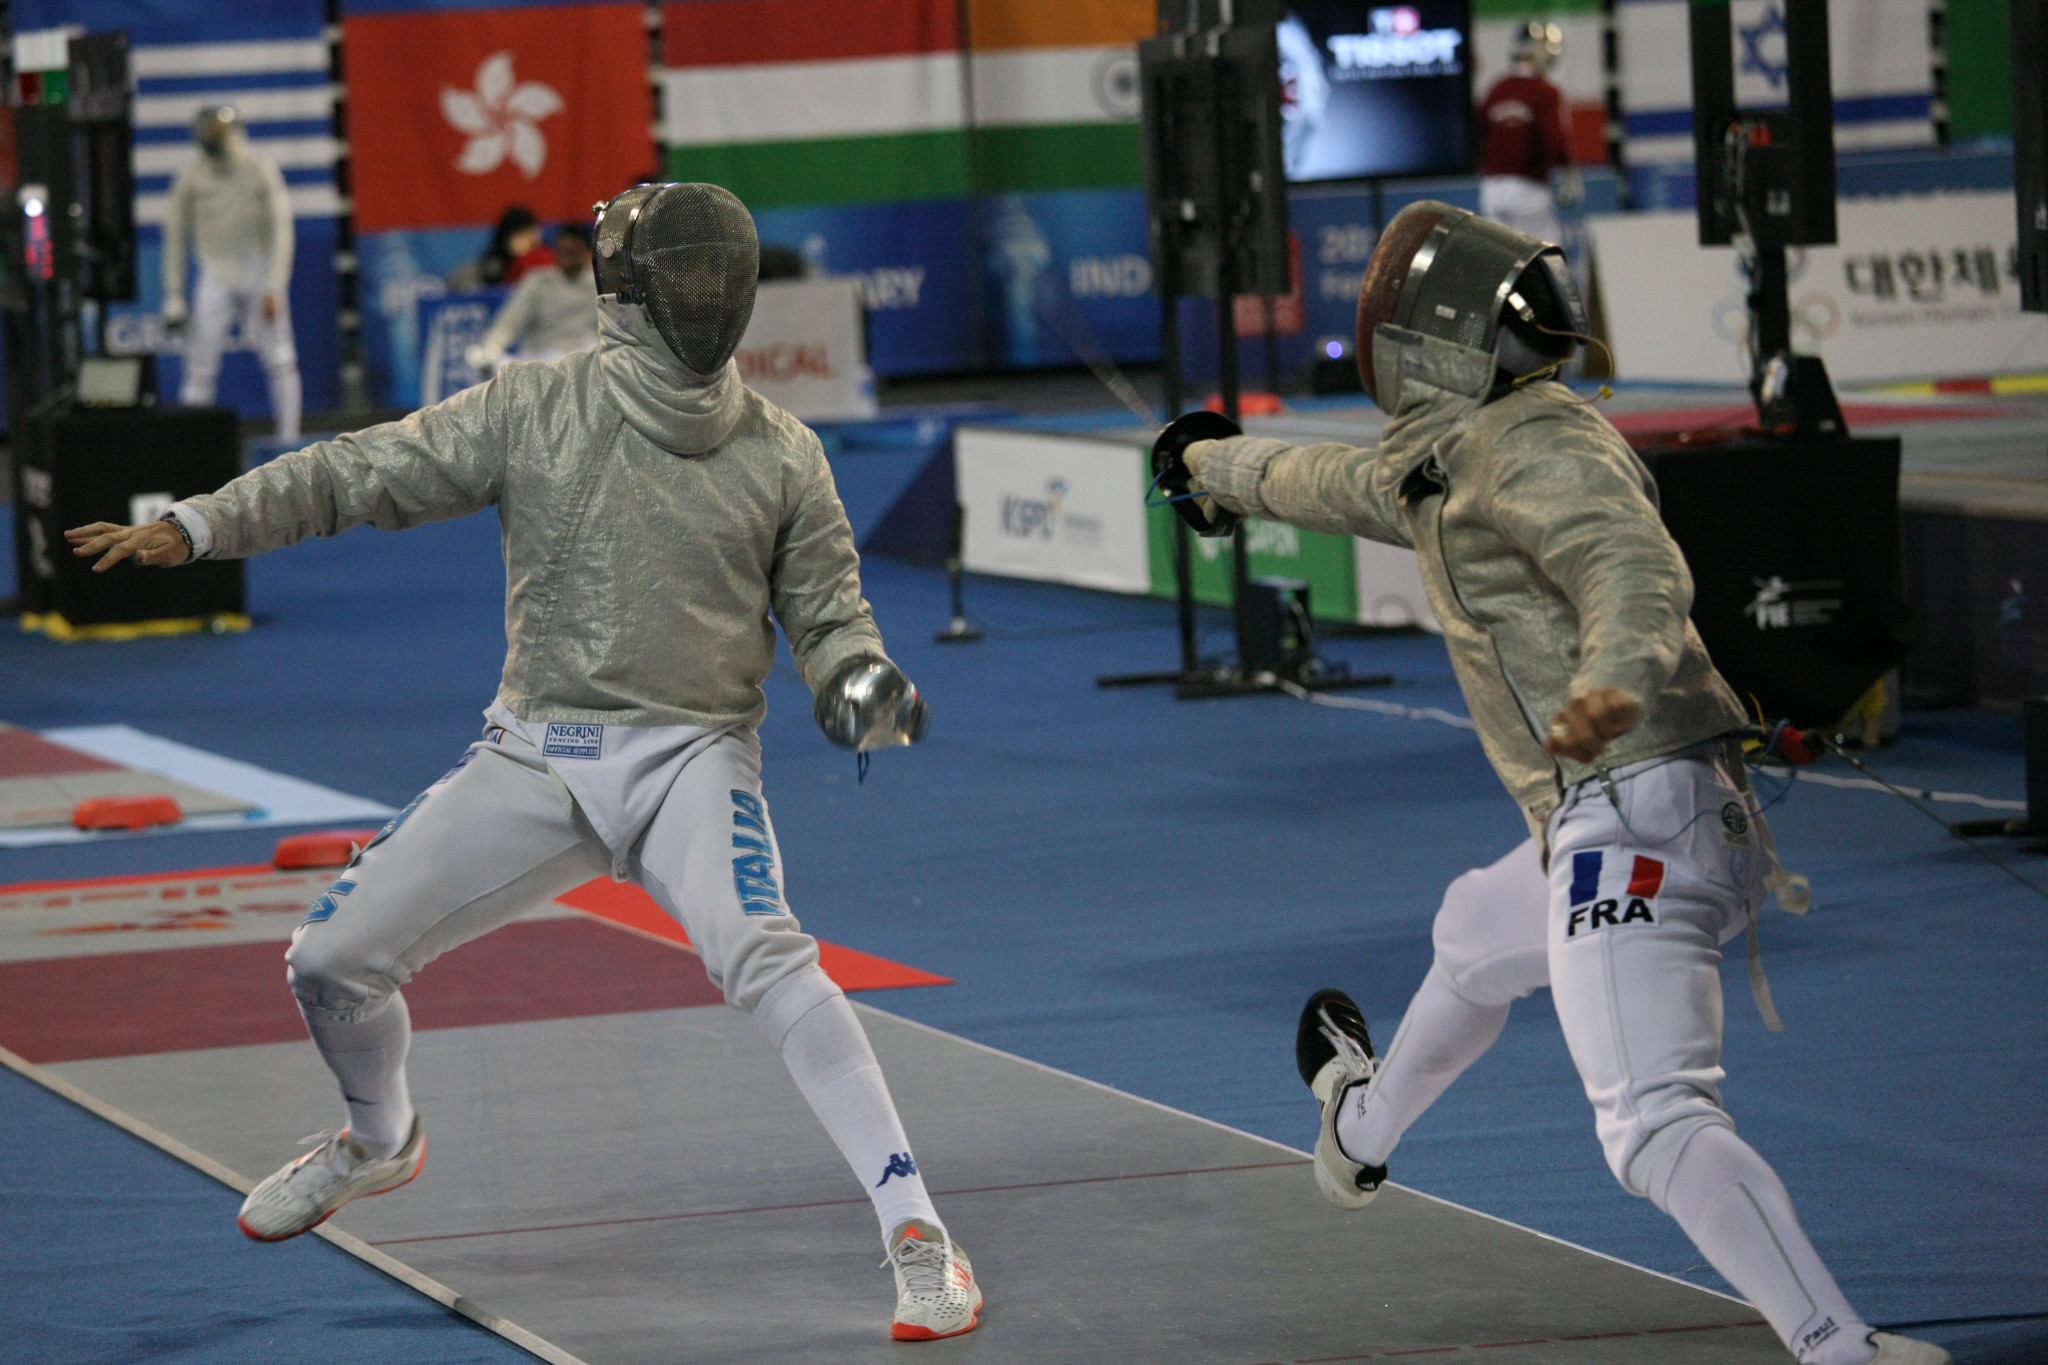 France's Lambert through to face top seed Dershwitz at FIE Men's Sabre World Cup in Madrid